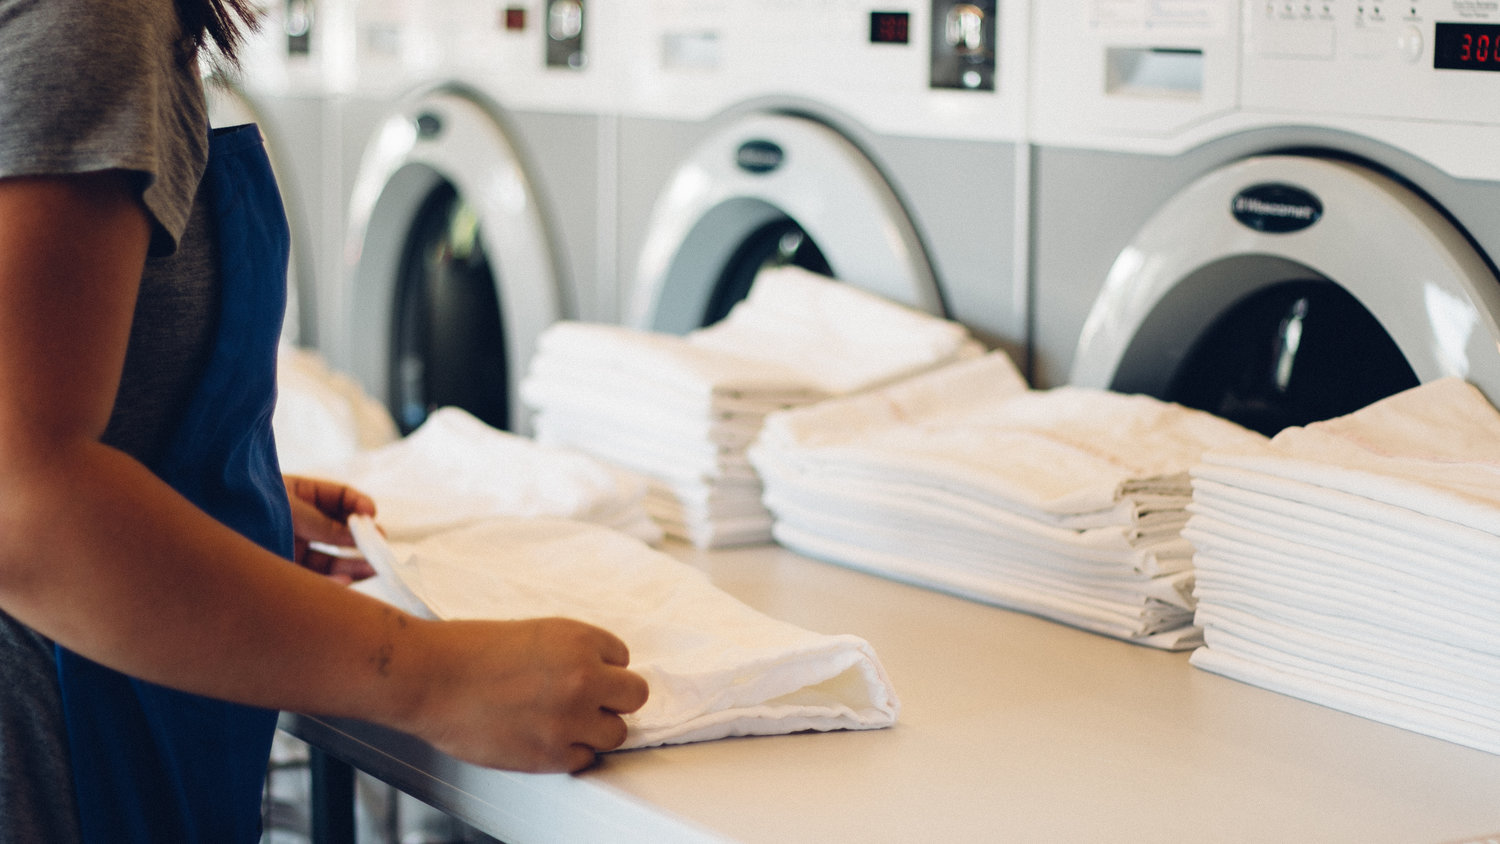 a woman folding sheets in a laundry facility